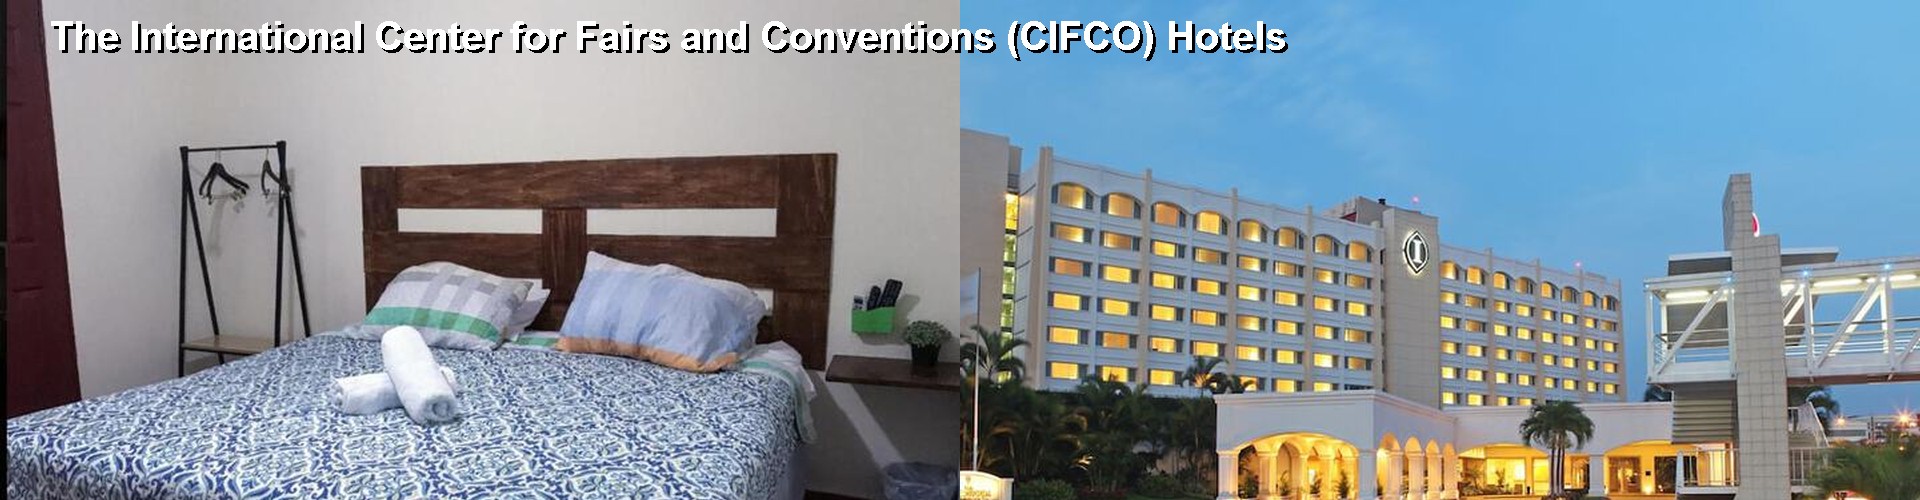 5 Best Hotels near The International Center for Fairs and Conventions (CIFCO)